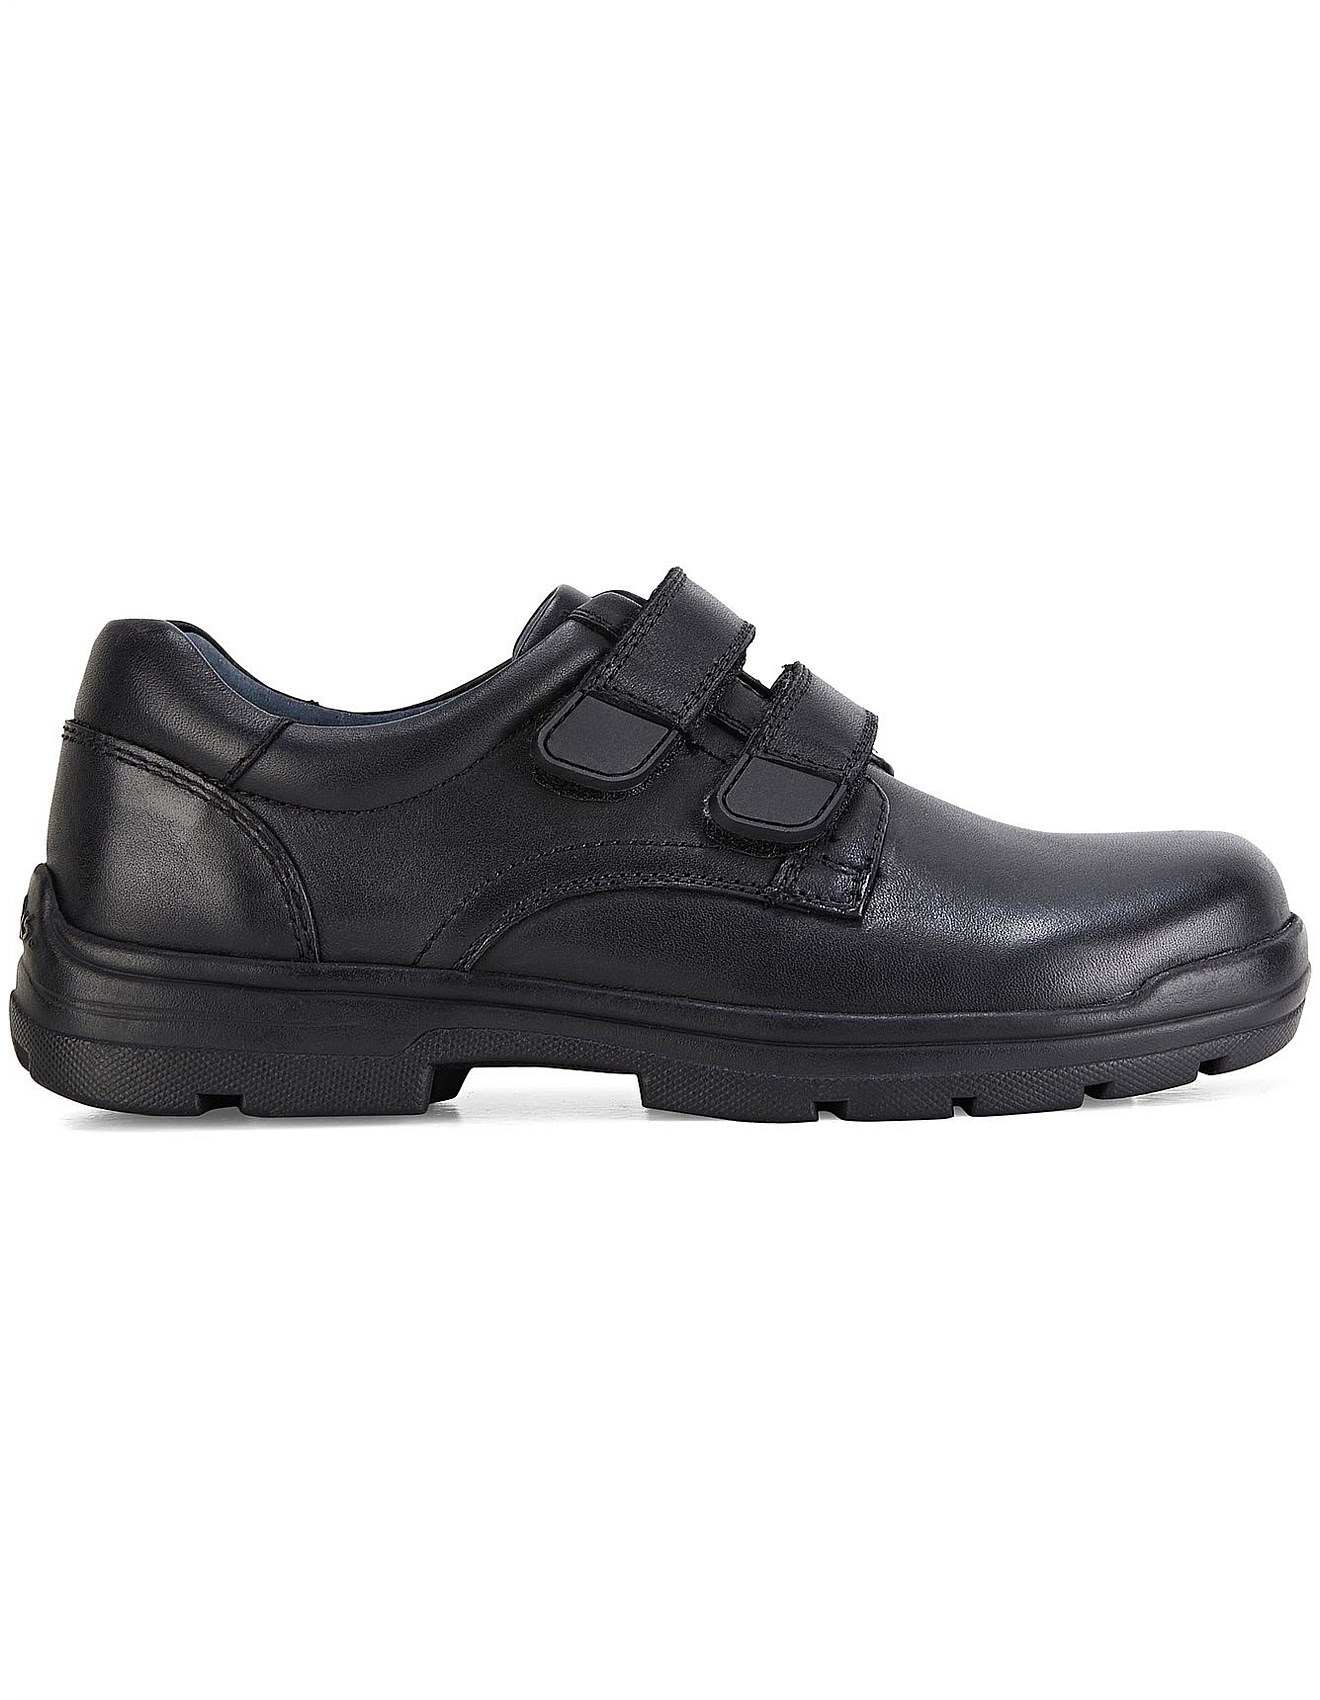 Monitor Leather Velcro Shoe - Sale : Final Clearance on Now! Bobux ...